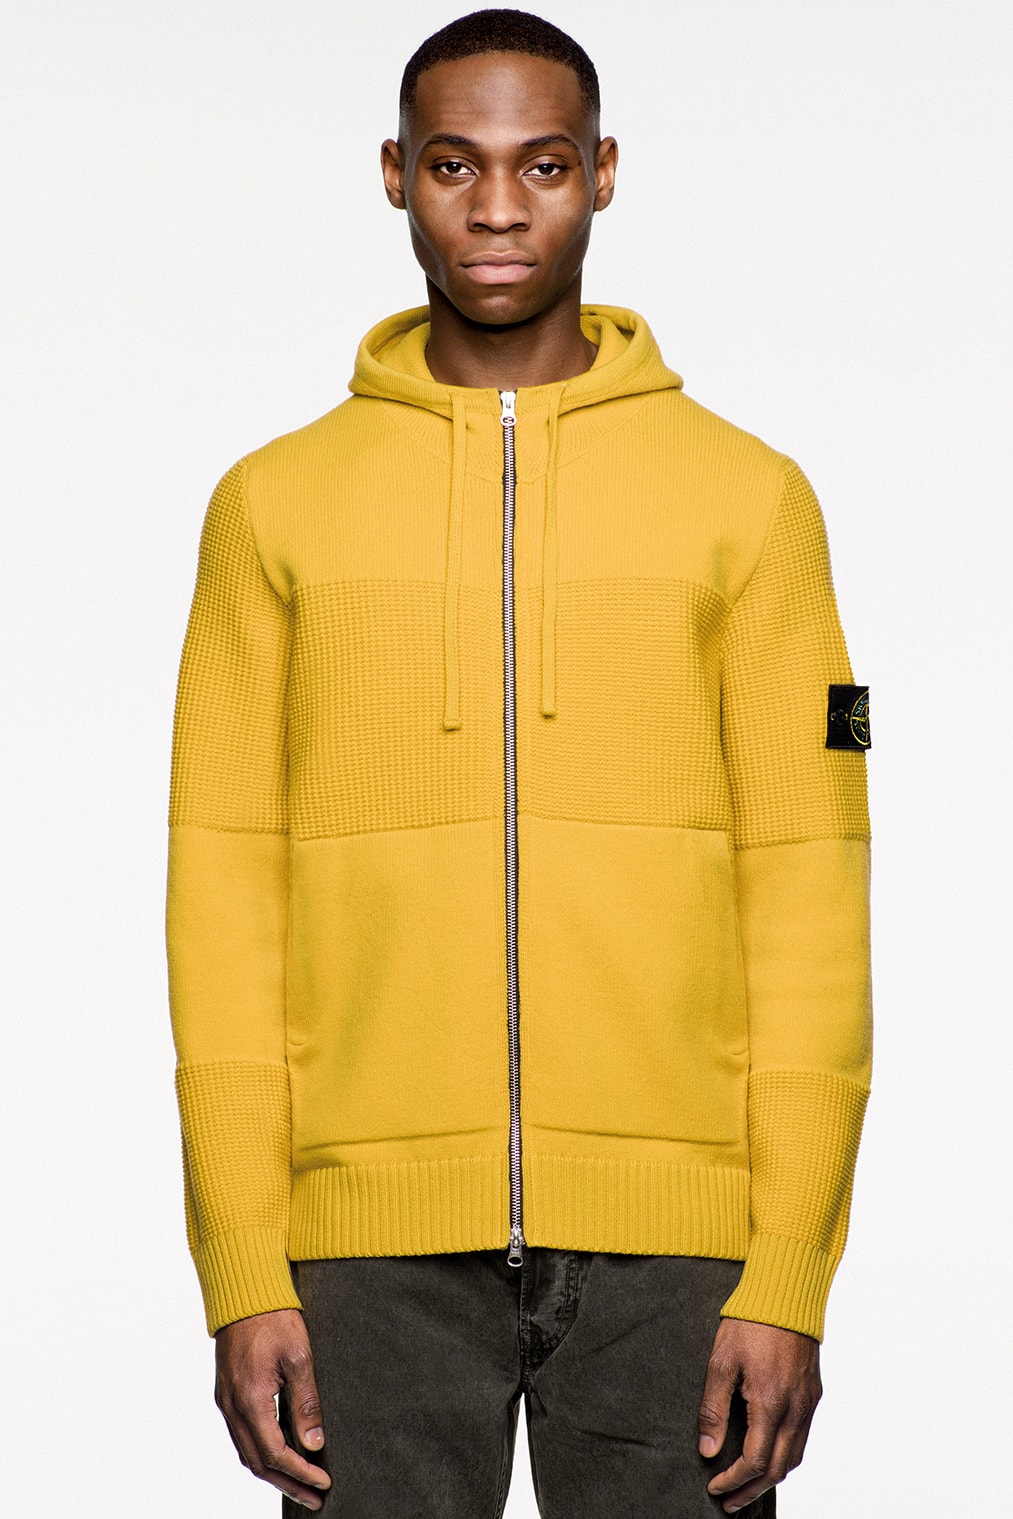 Stone Island Fall Winter 2018 Icon Imagery Lookbook collection